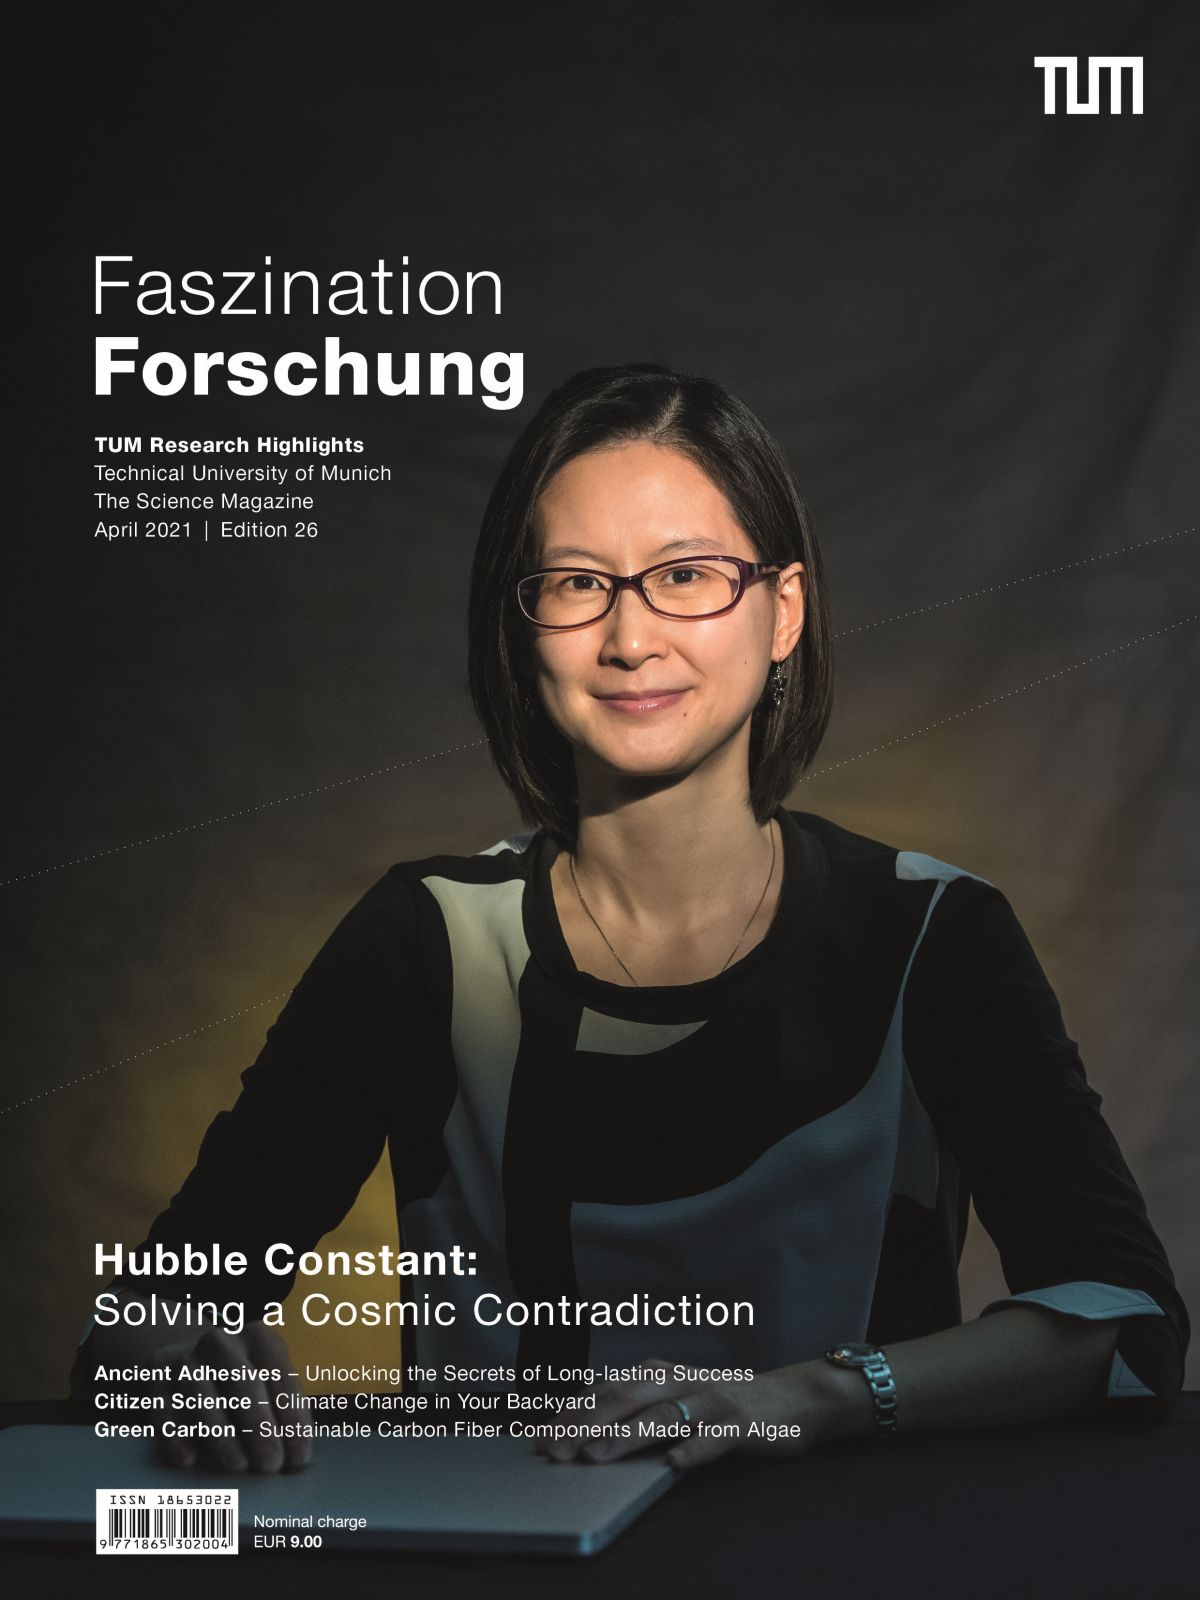 Cover page of “Faszination Forschung” magazine, edition 26